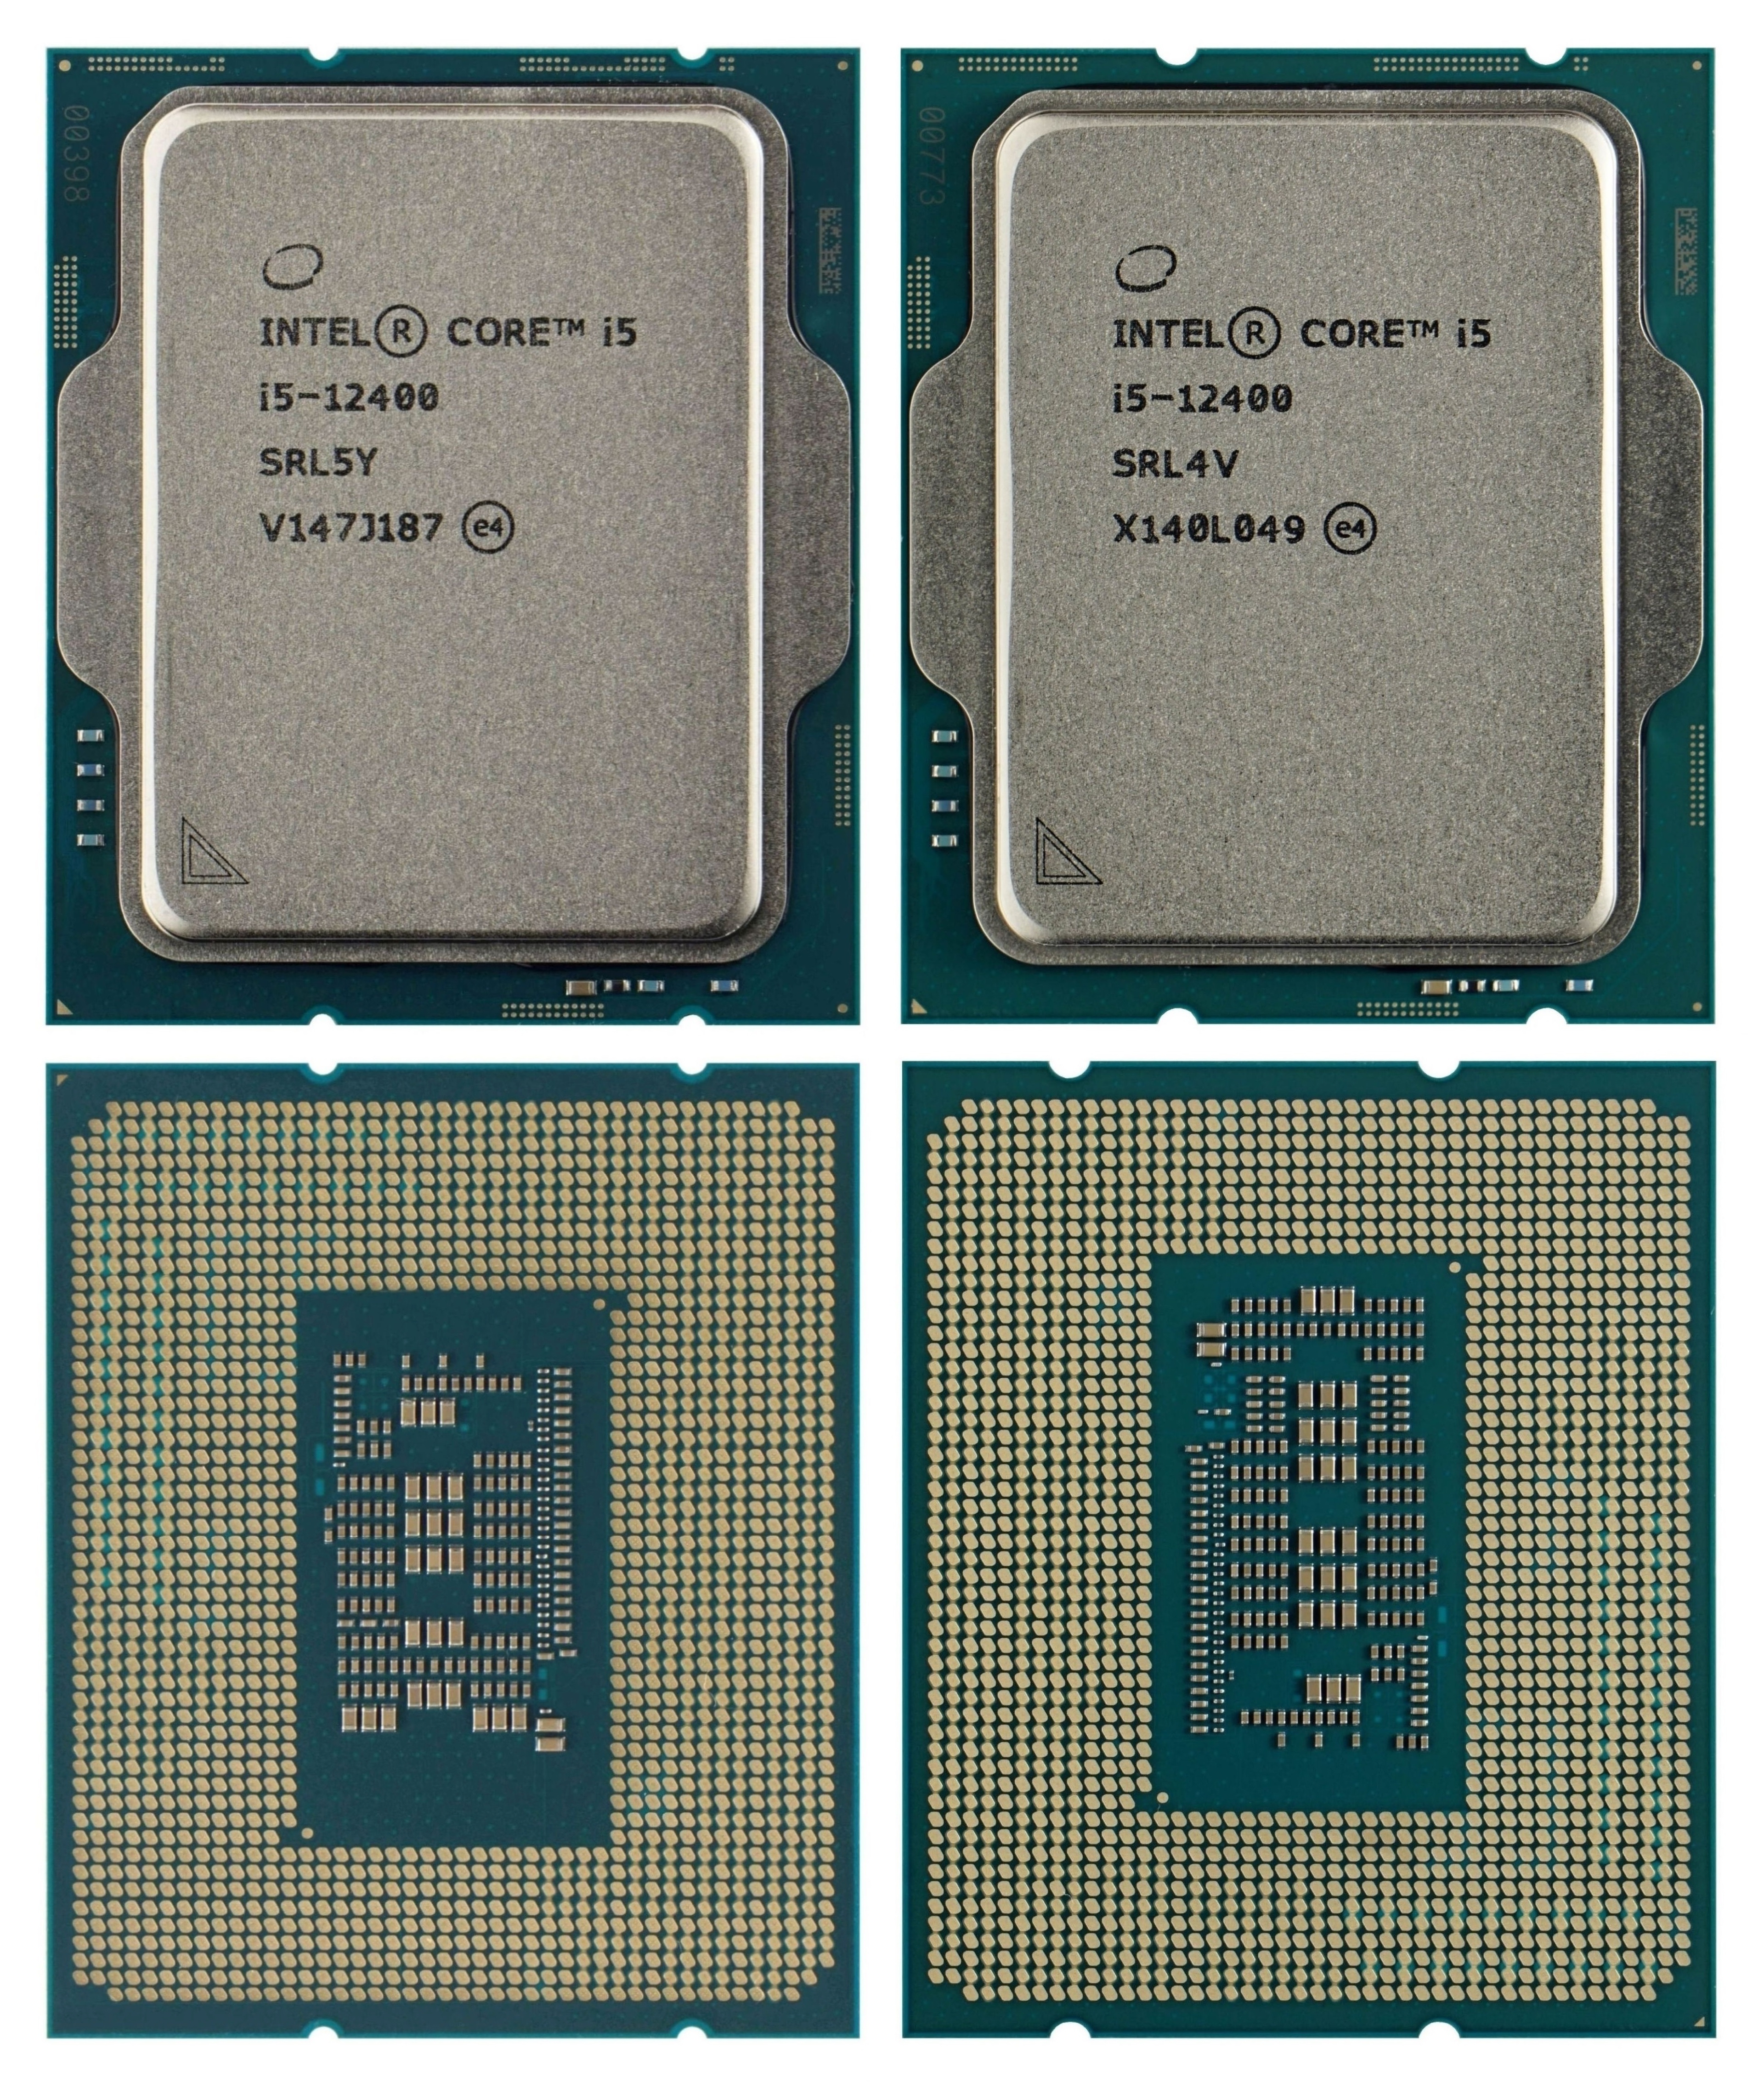 The same and yet different. Intel Core i5-12400 duel (H0 vs. C0